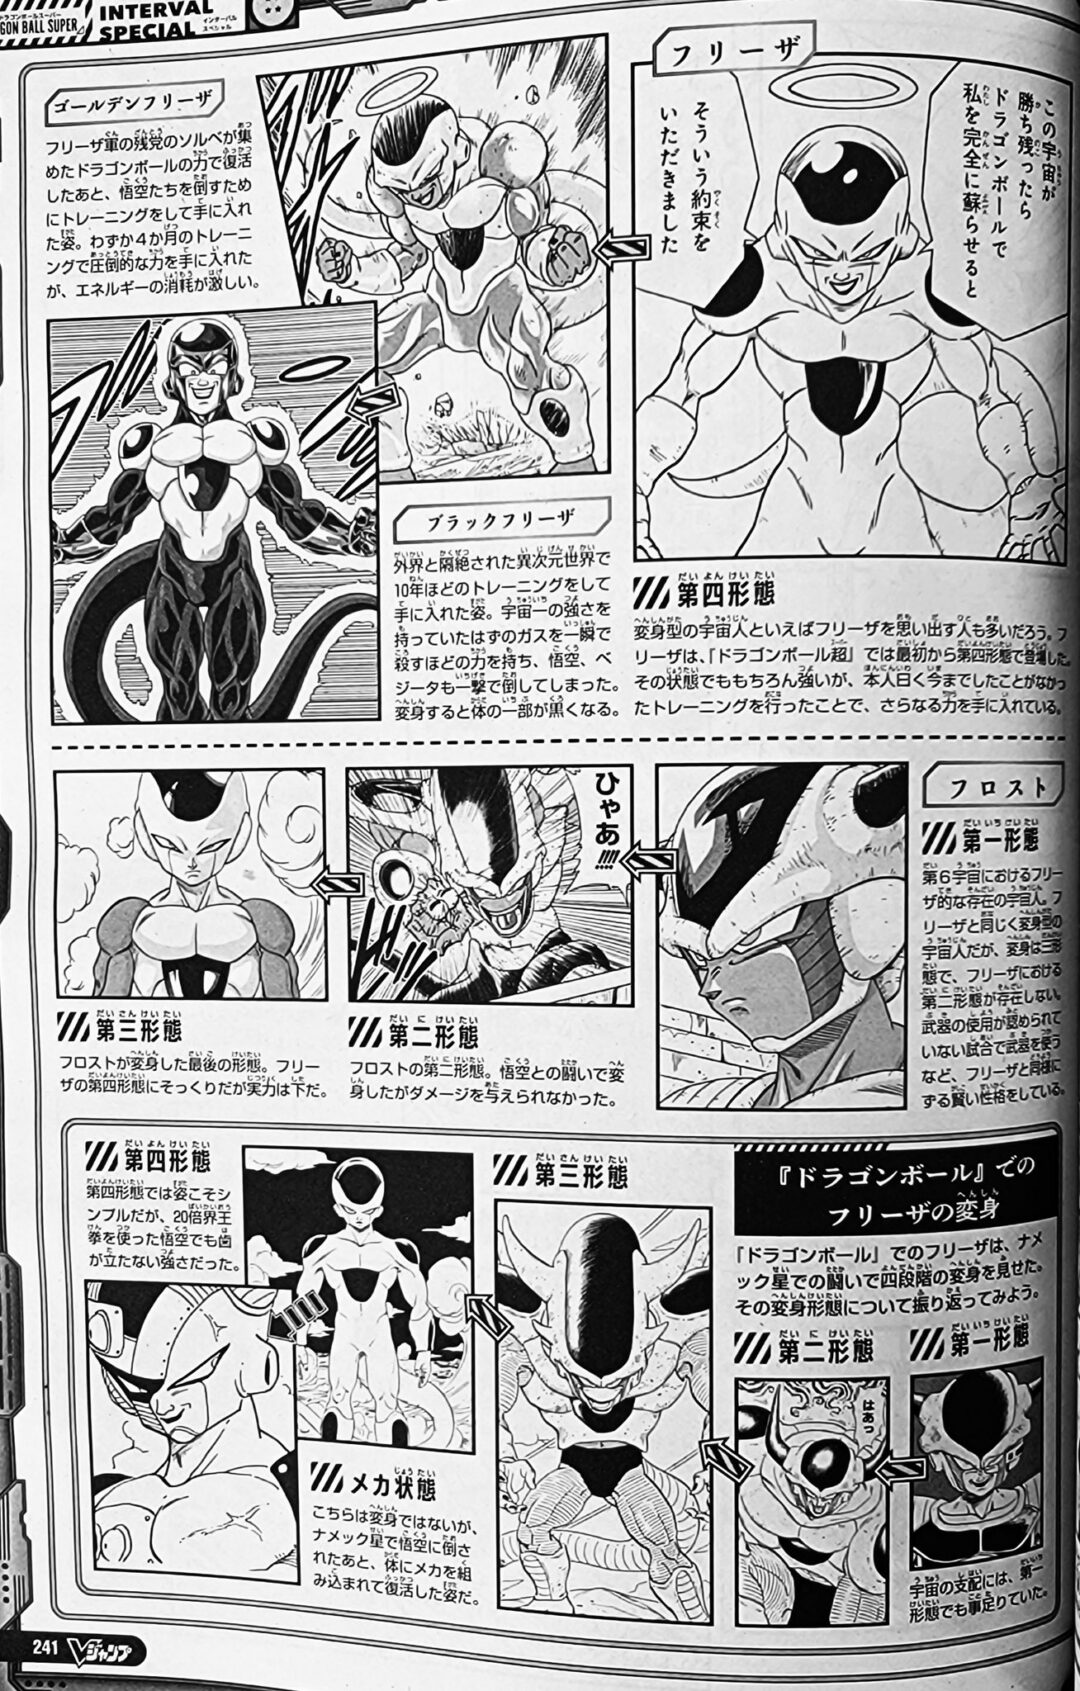 Interval Special Transformations Dragon Ball Page 4